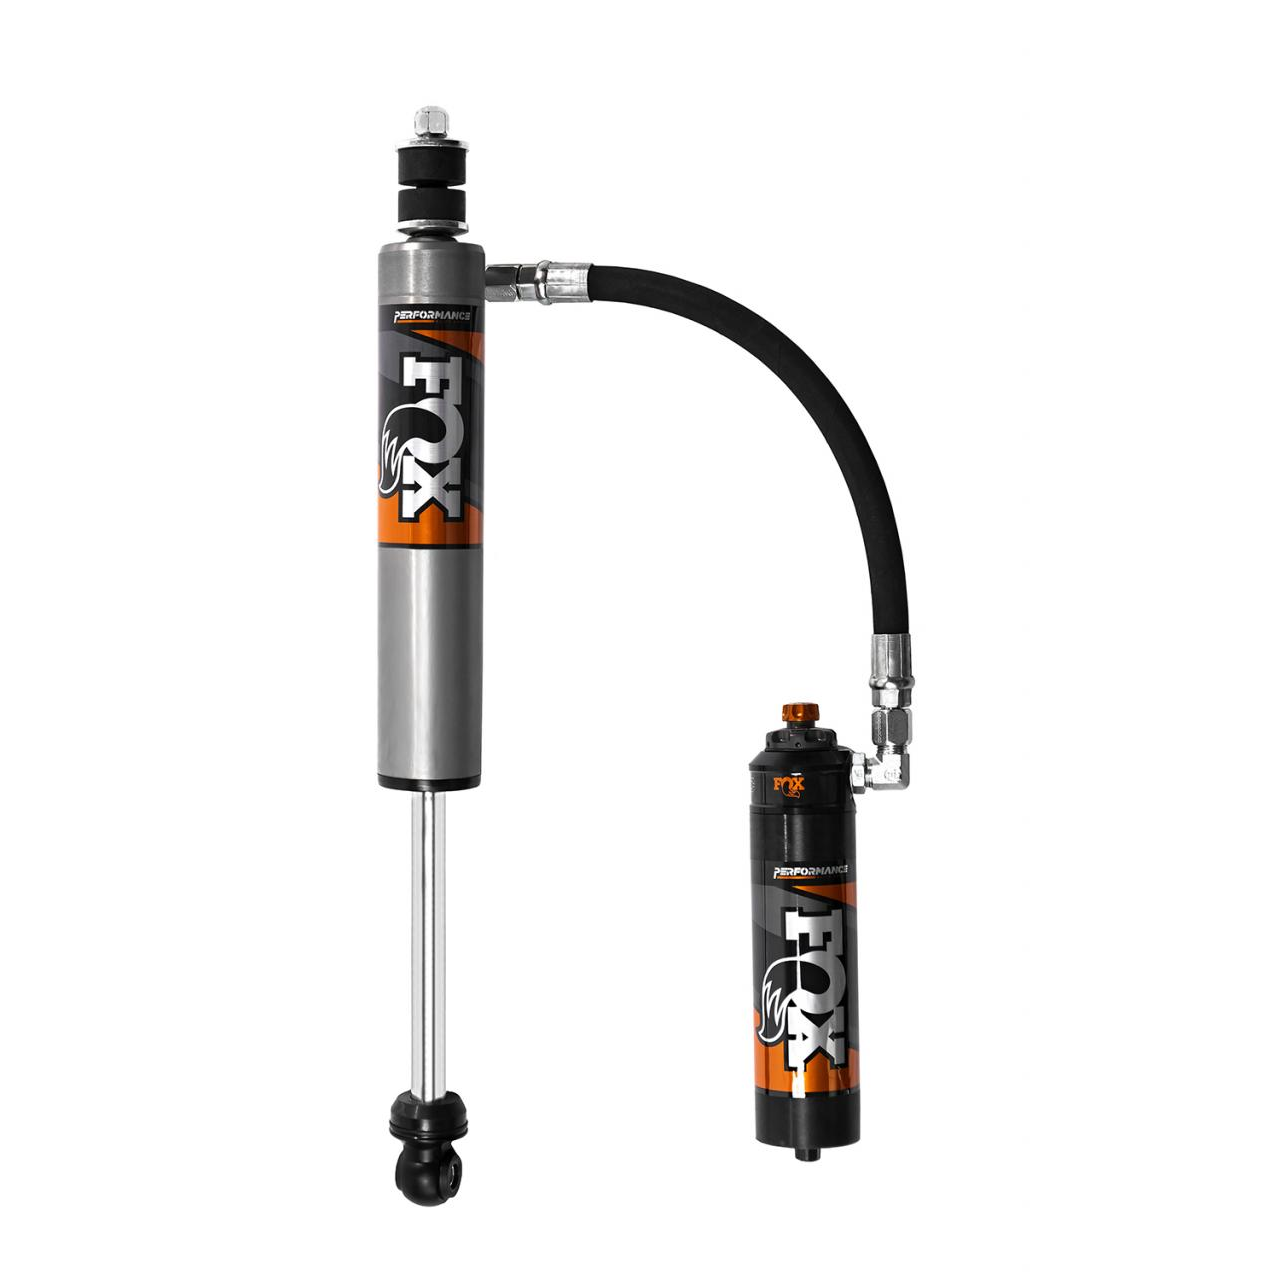 Fox Performance Elite 2.5 Series Remote Res Shocks for 2014+ Ram 3500 - Outback Kitters